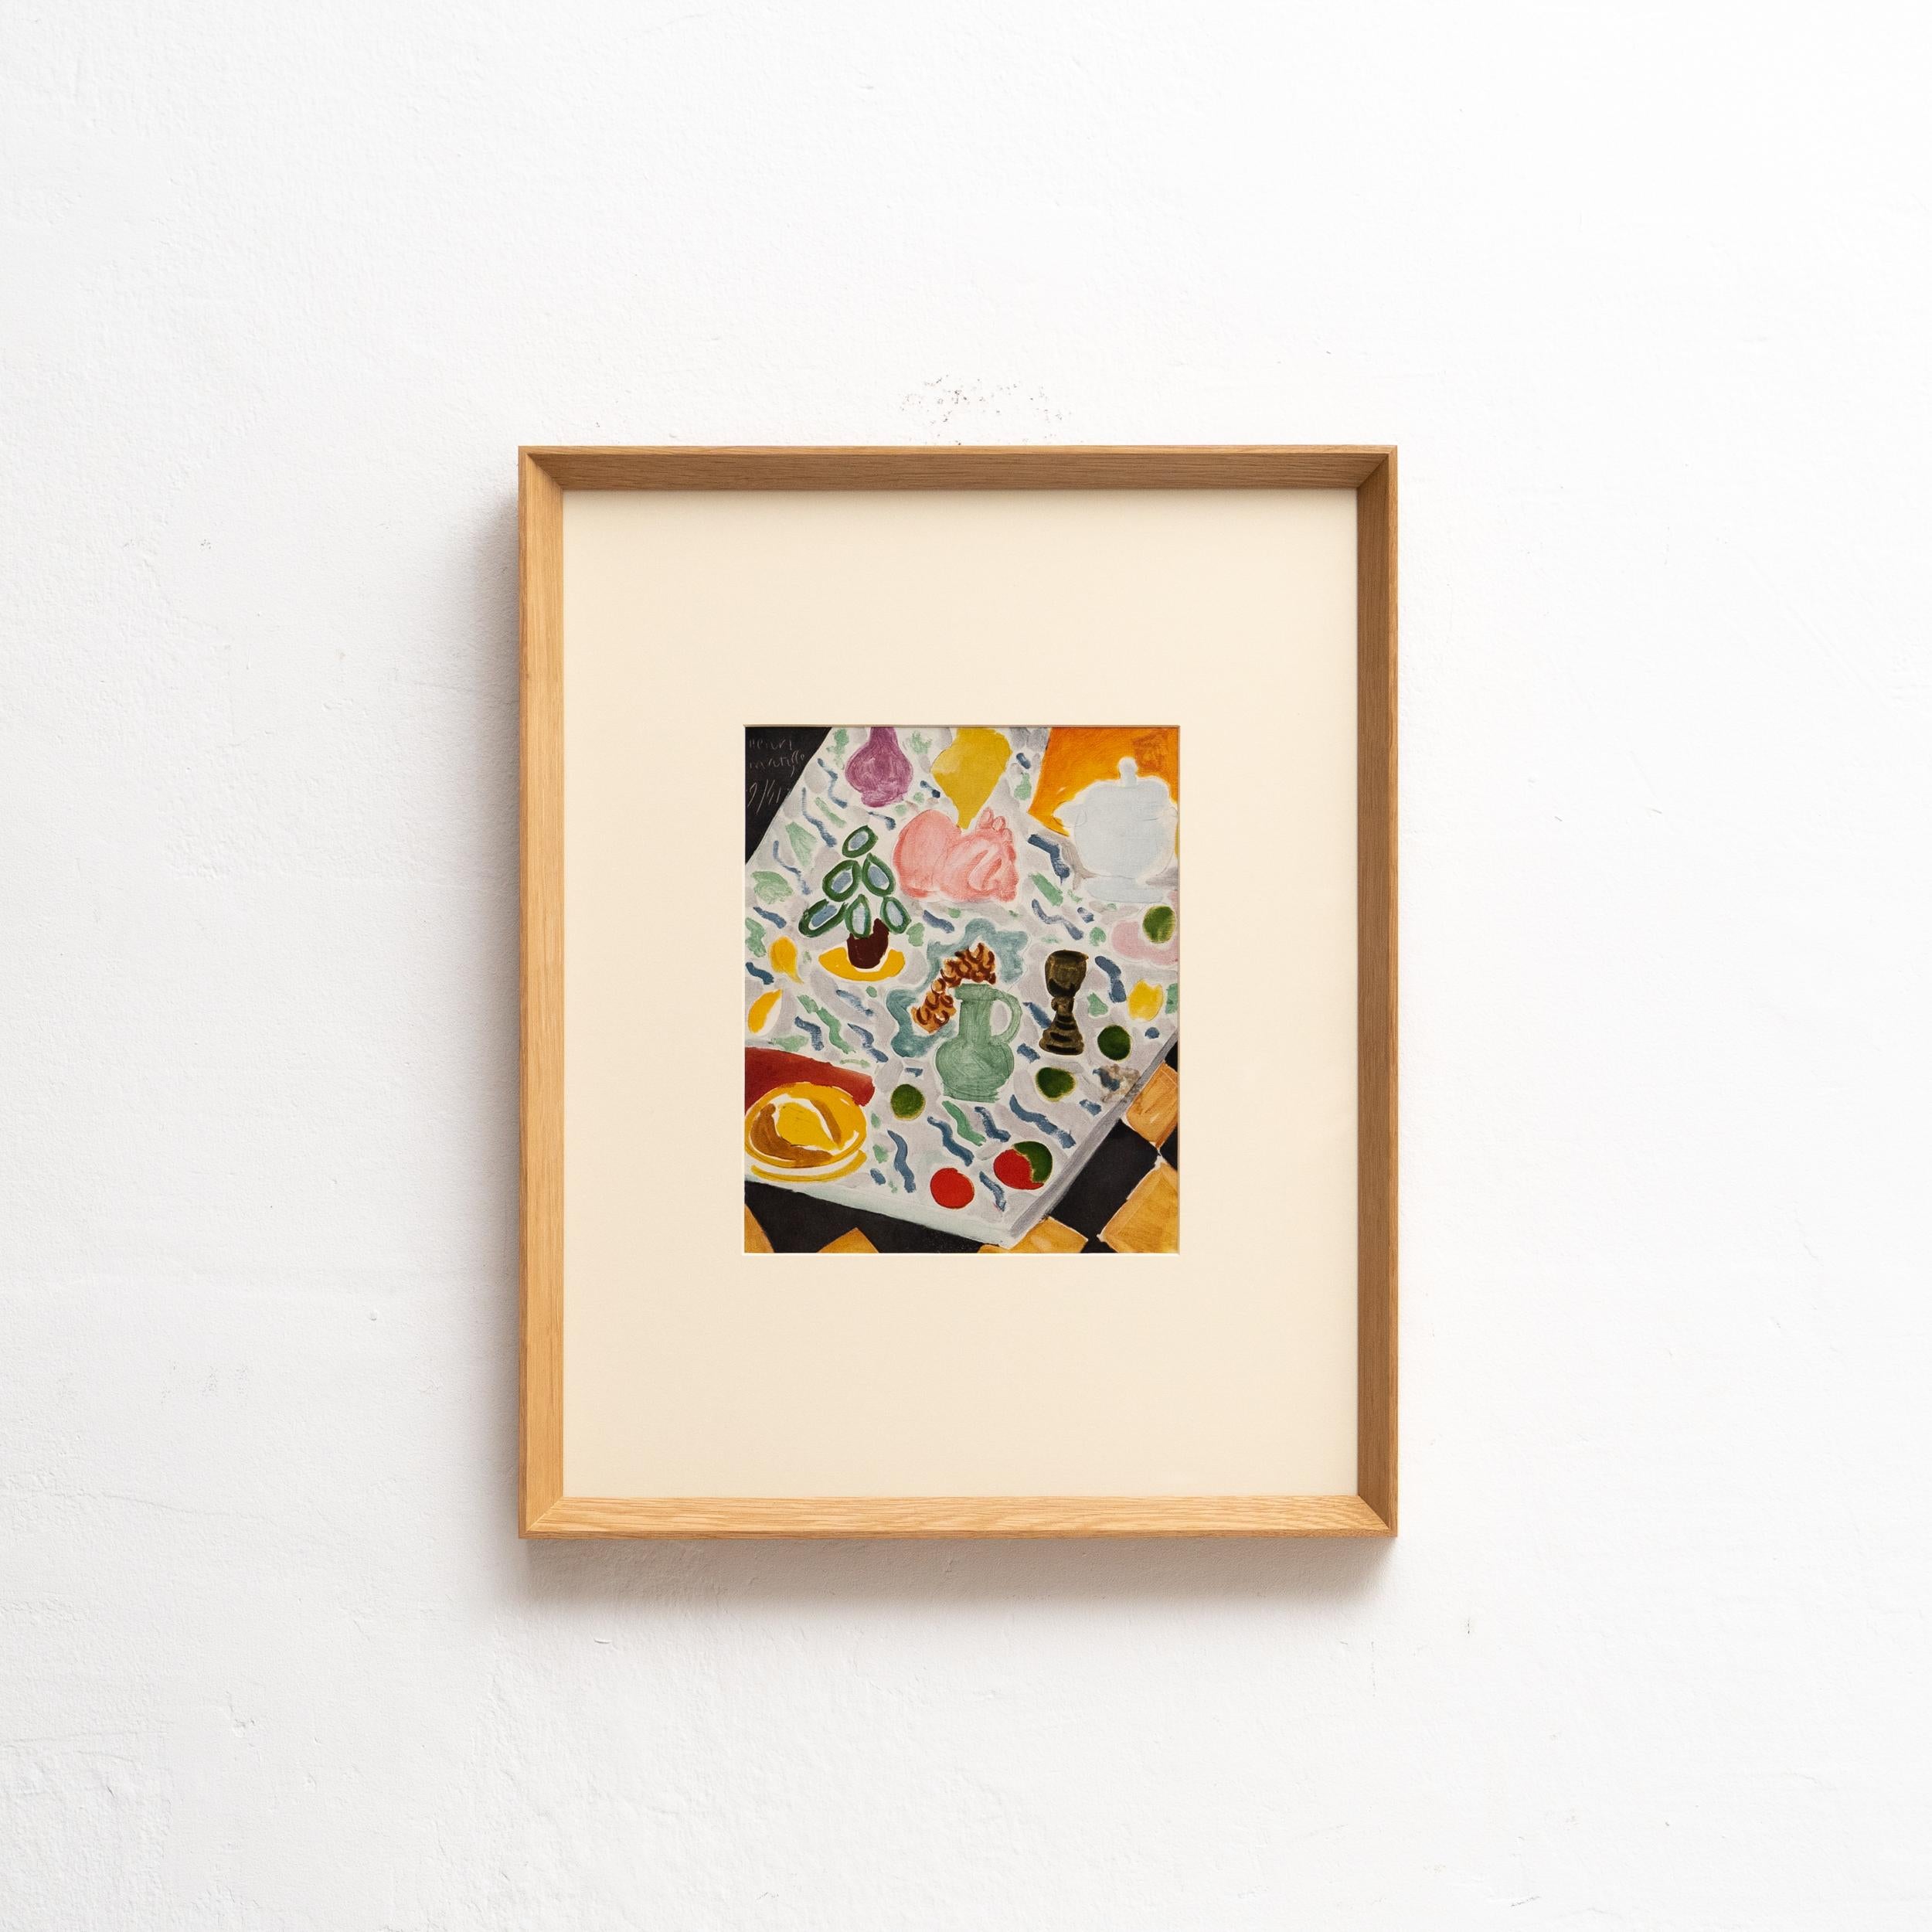 Step into the world of Henri Matisse with this rare color lithograph, a testament to the artist's unparalleled use of color and fluid draughtsmanship. Published in 1943 by Editions du Chene, Paris (France), this exquisite piece captures the essence